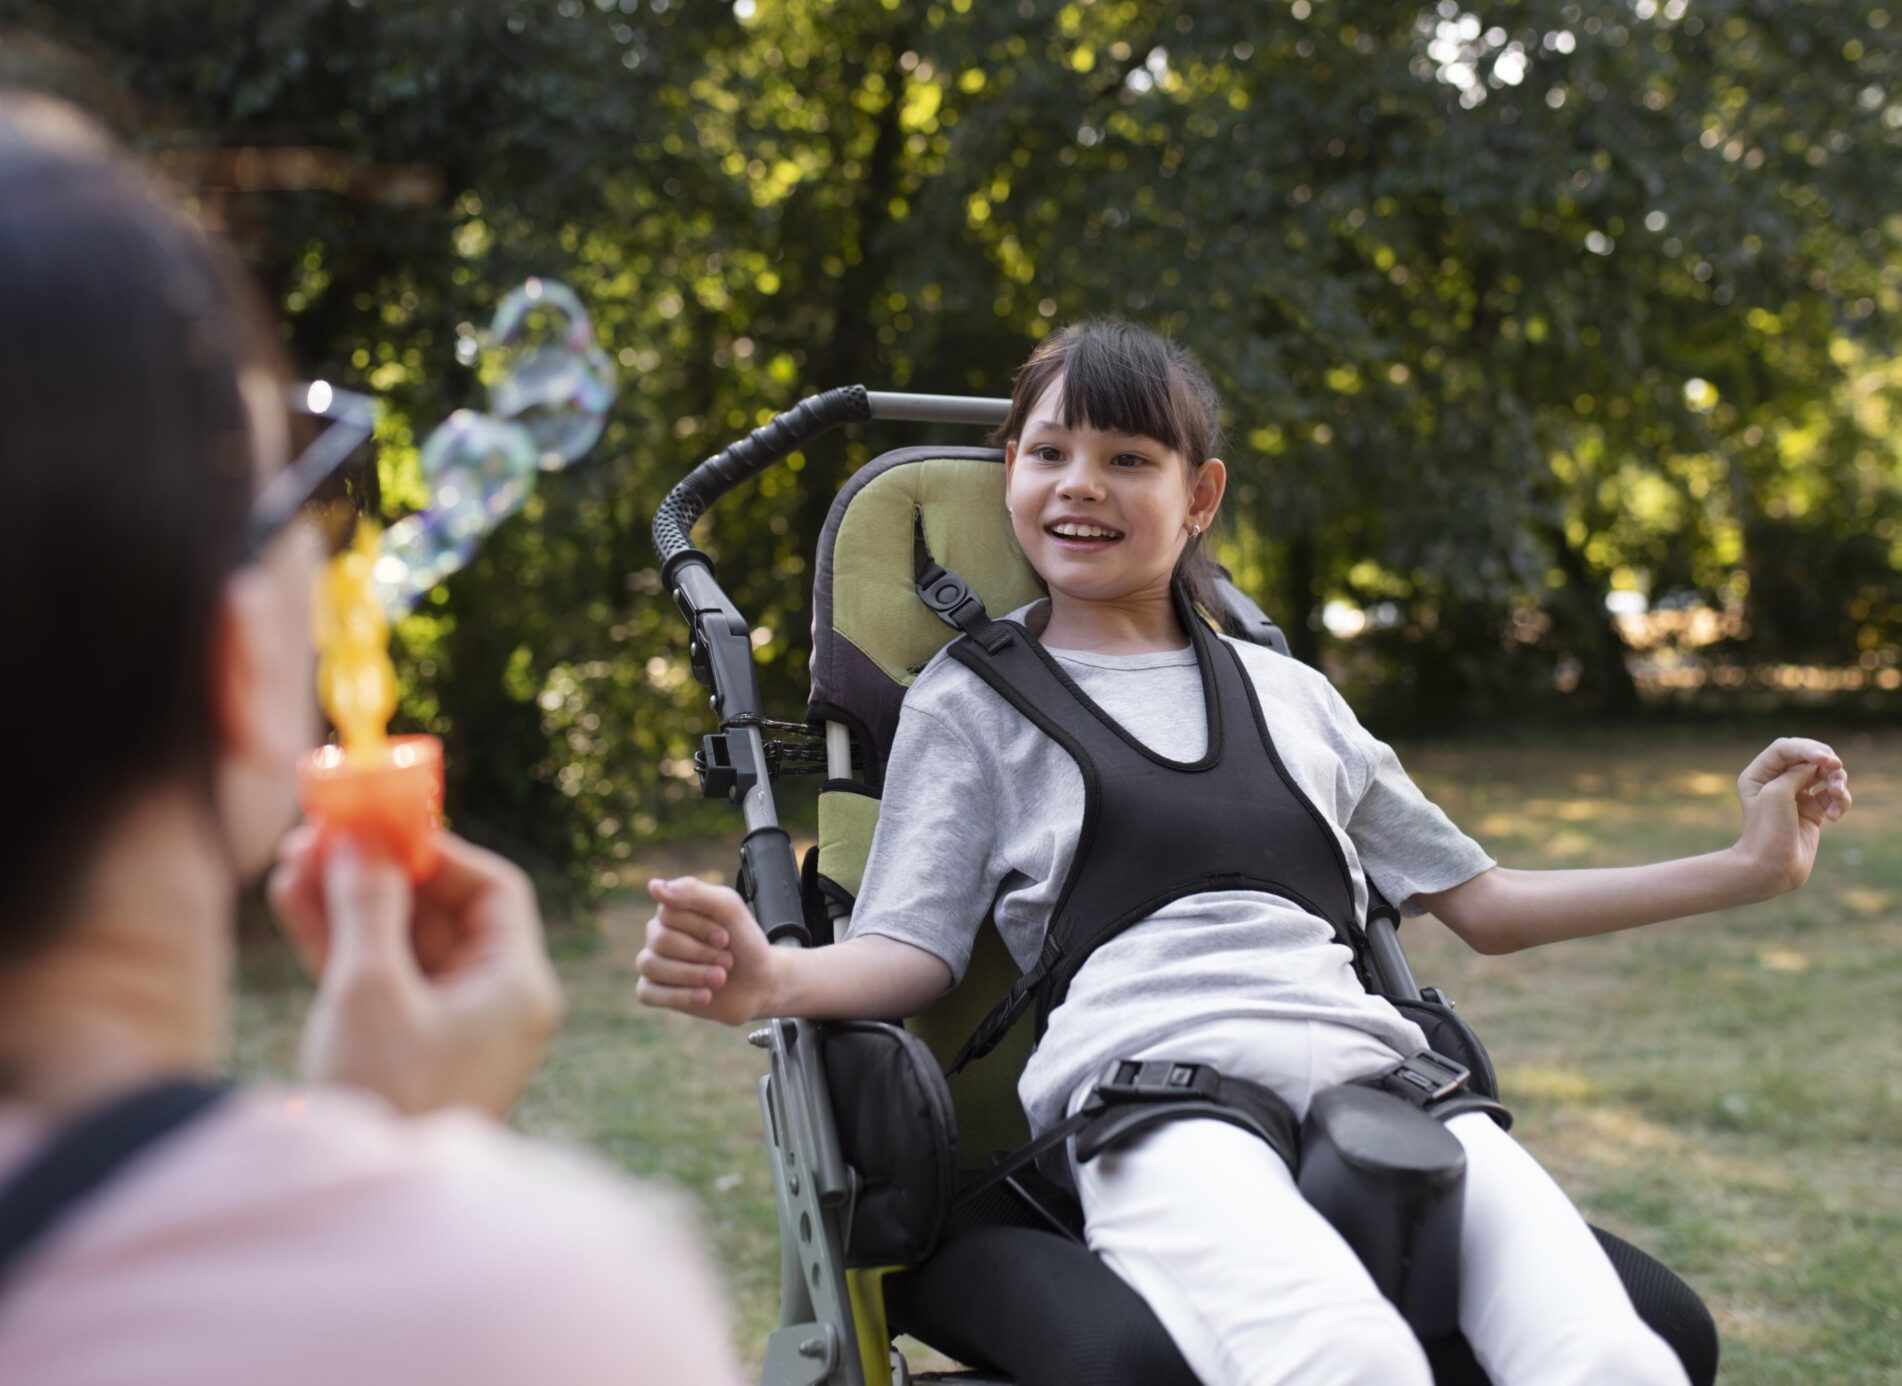 A young girl in an adaptive chair grins as another person blows bubbles towards her in a park.